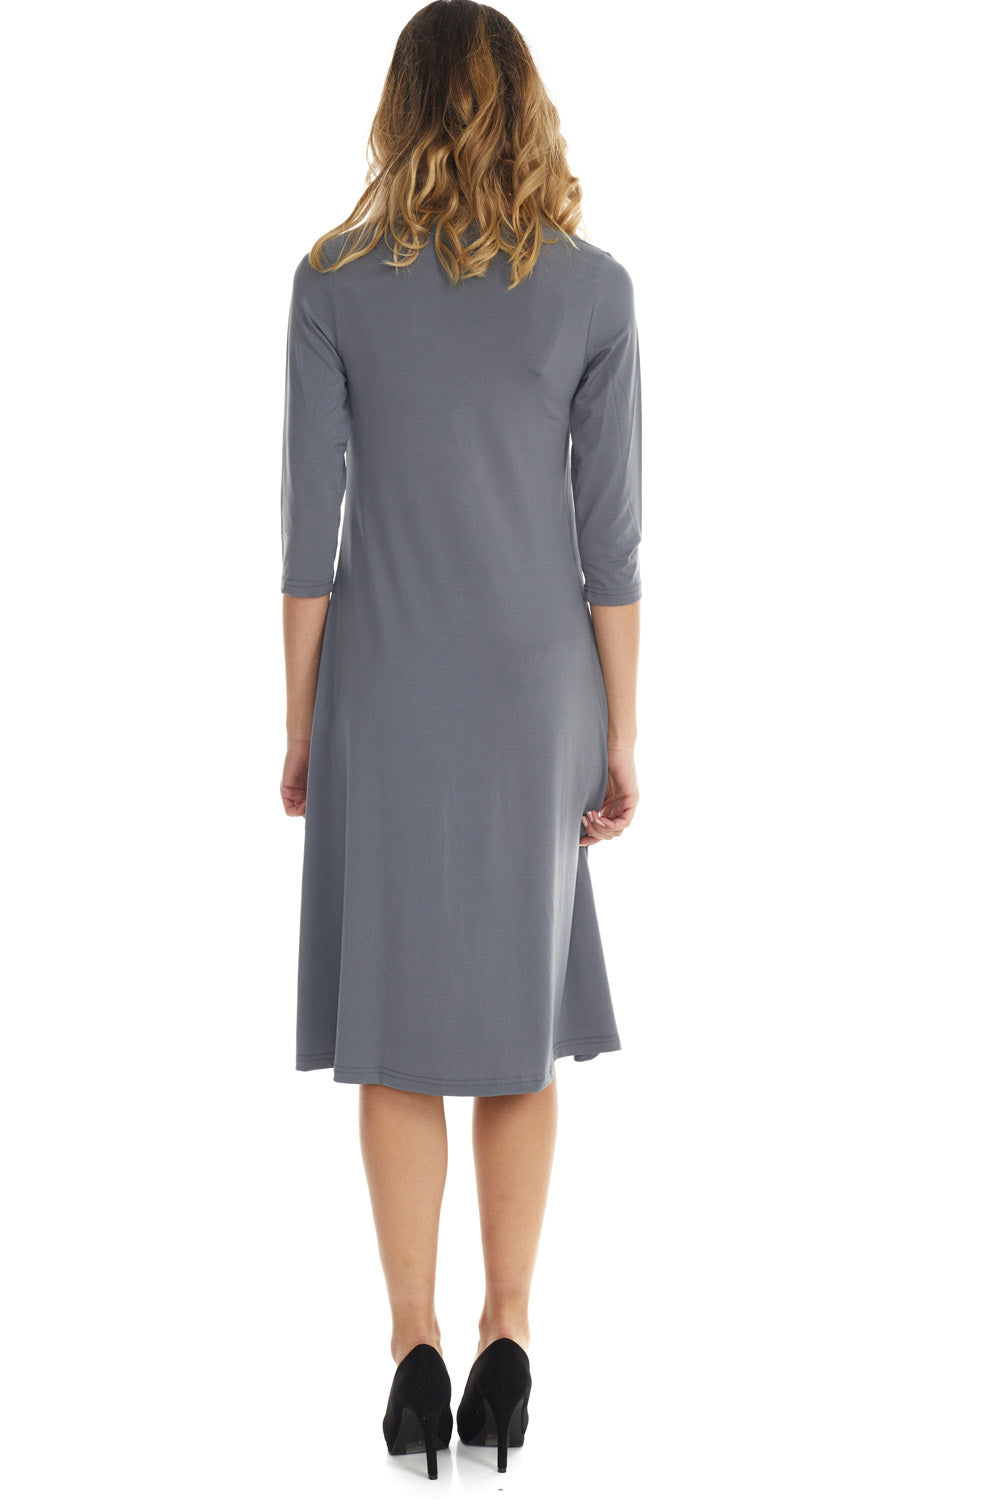 charcoal dark grey gray flary below knee length 3/4 sleeve crew neck modest tznius a-line dress with pockets big enough for smartphone